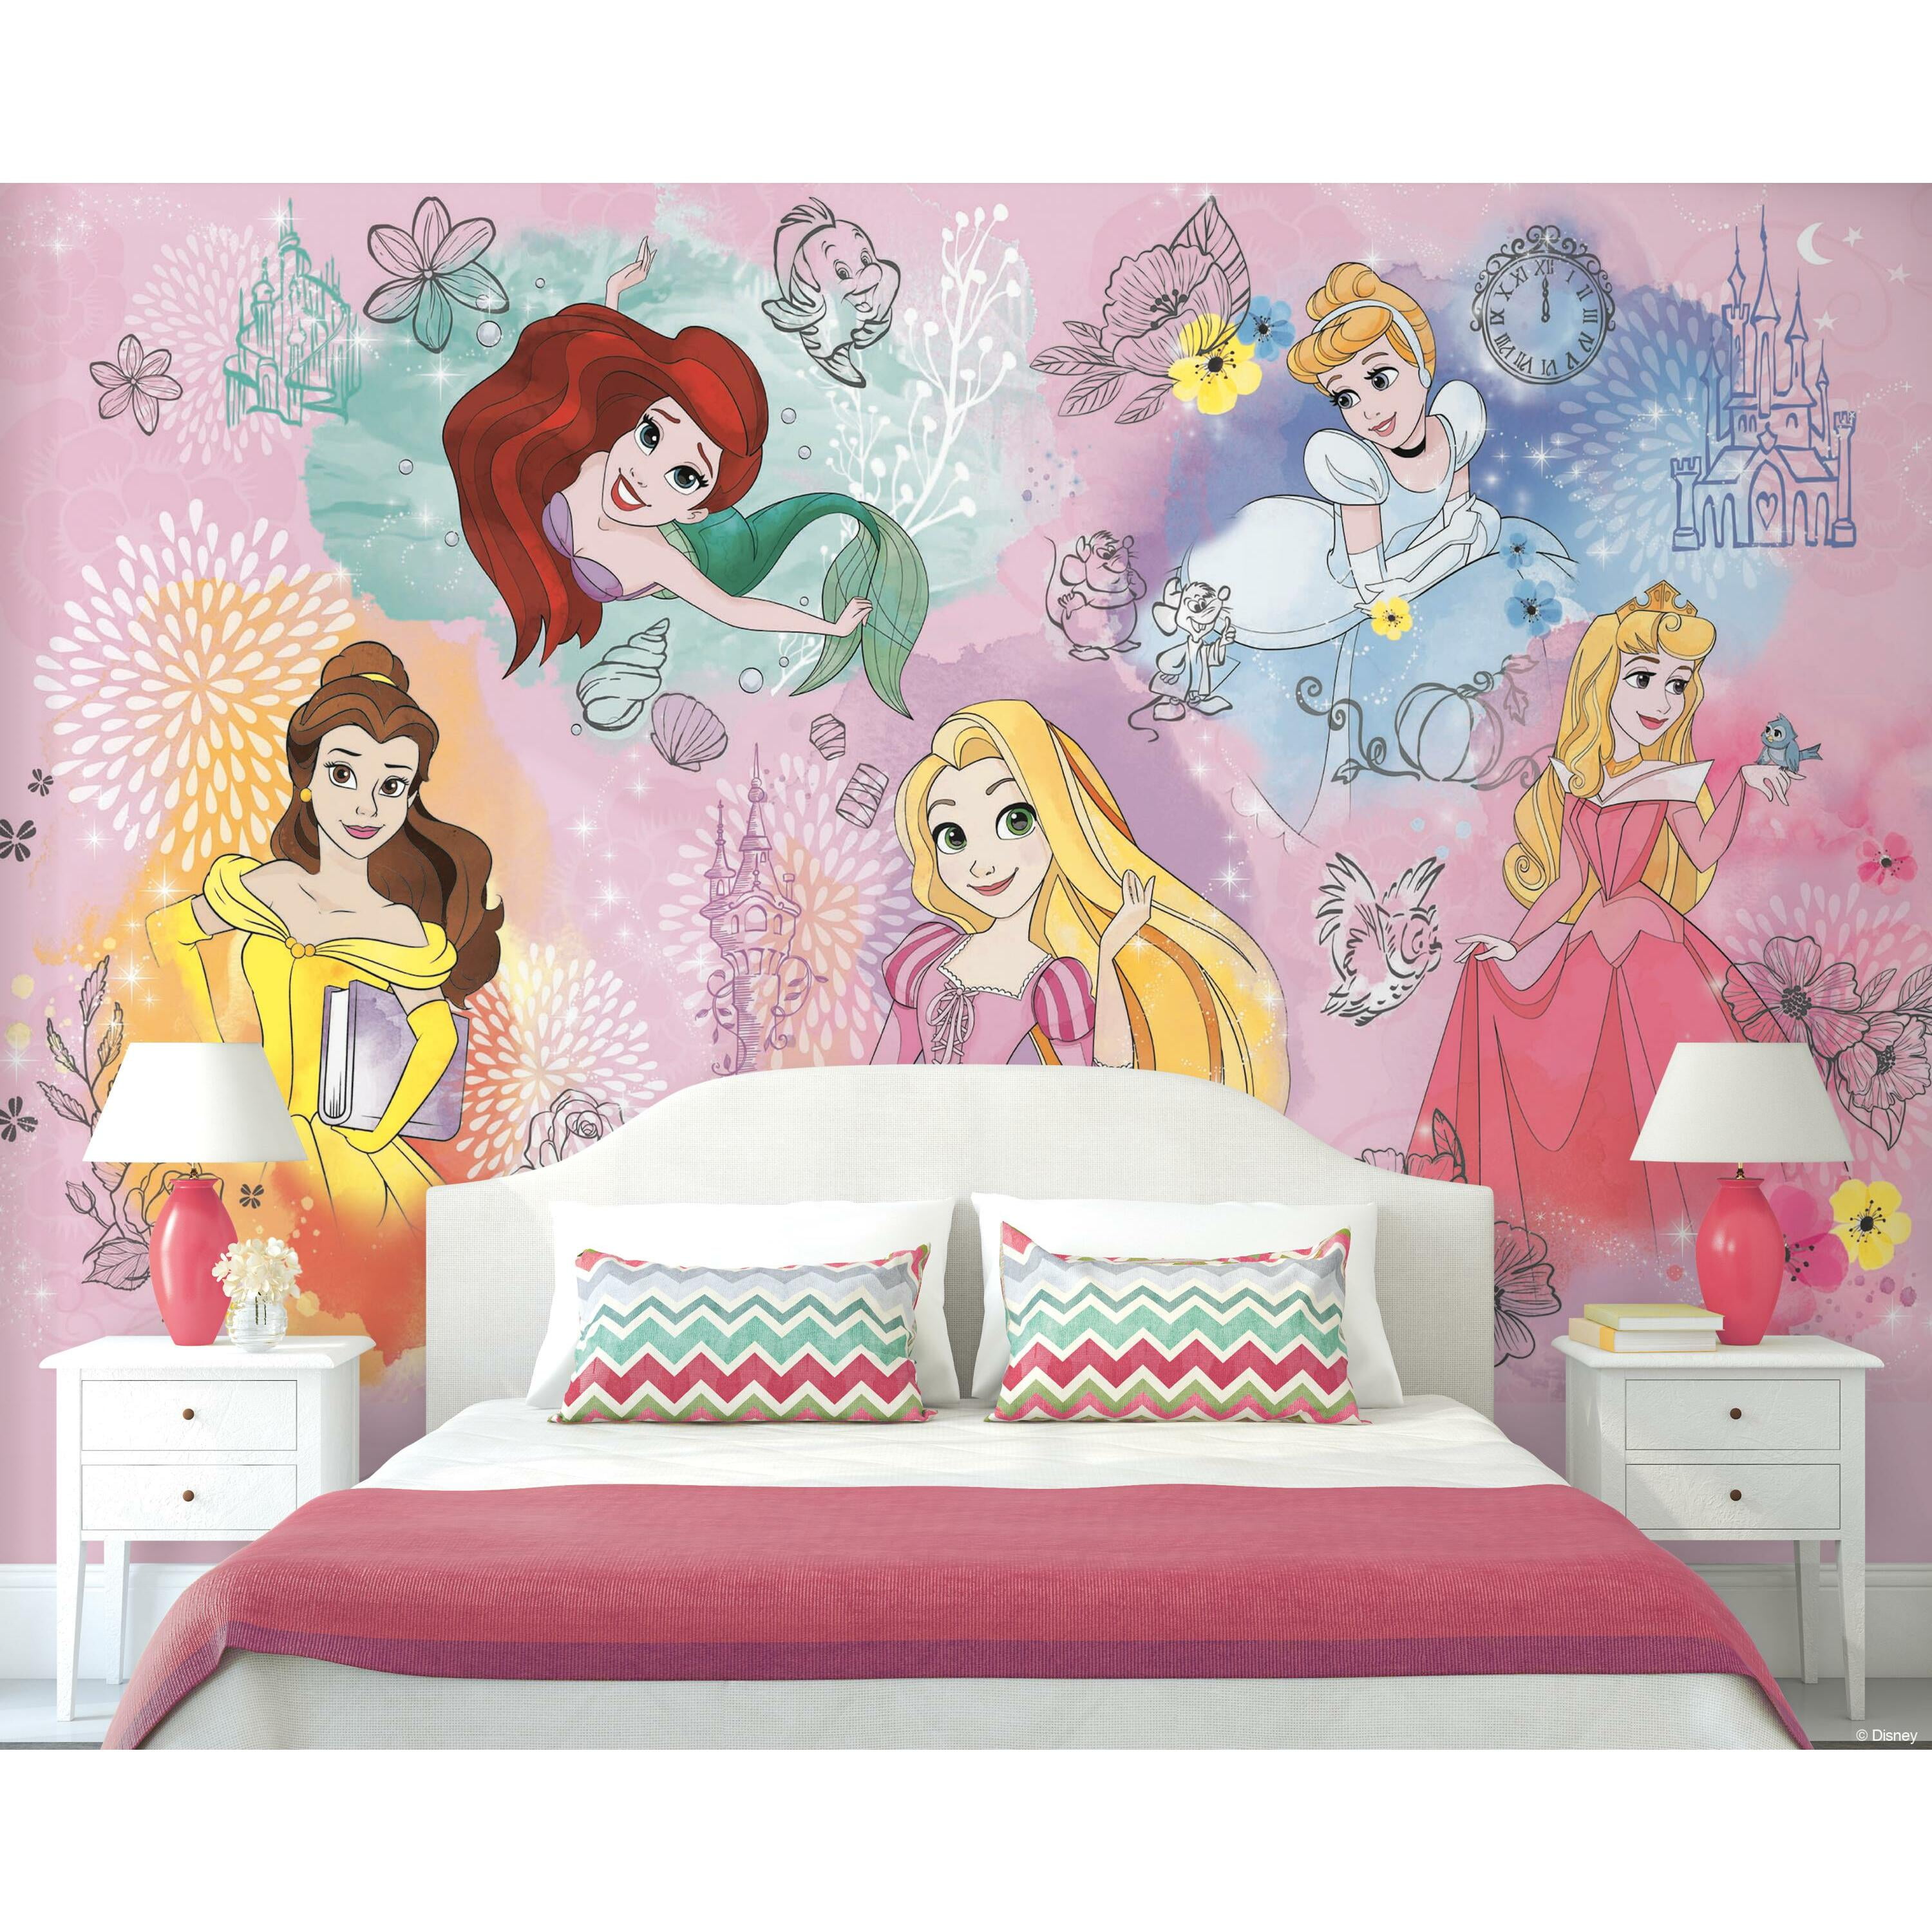 RoomMates Disney Princess Peel and Stick Wall Mural, Pink and Yellow ...